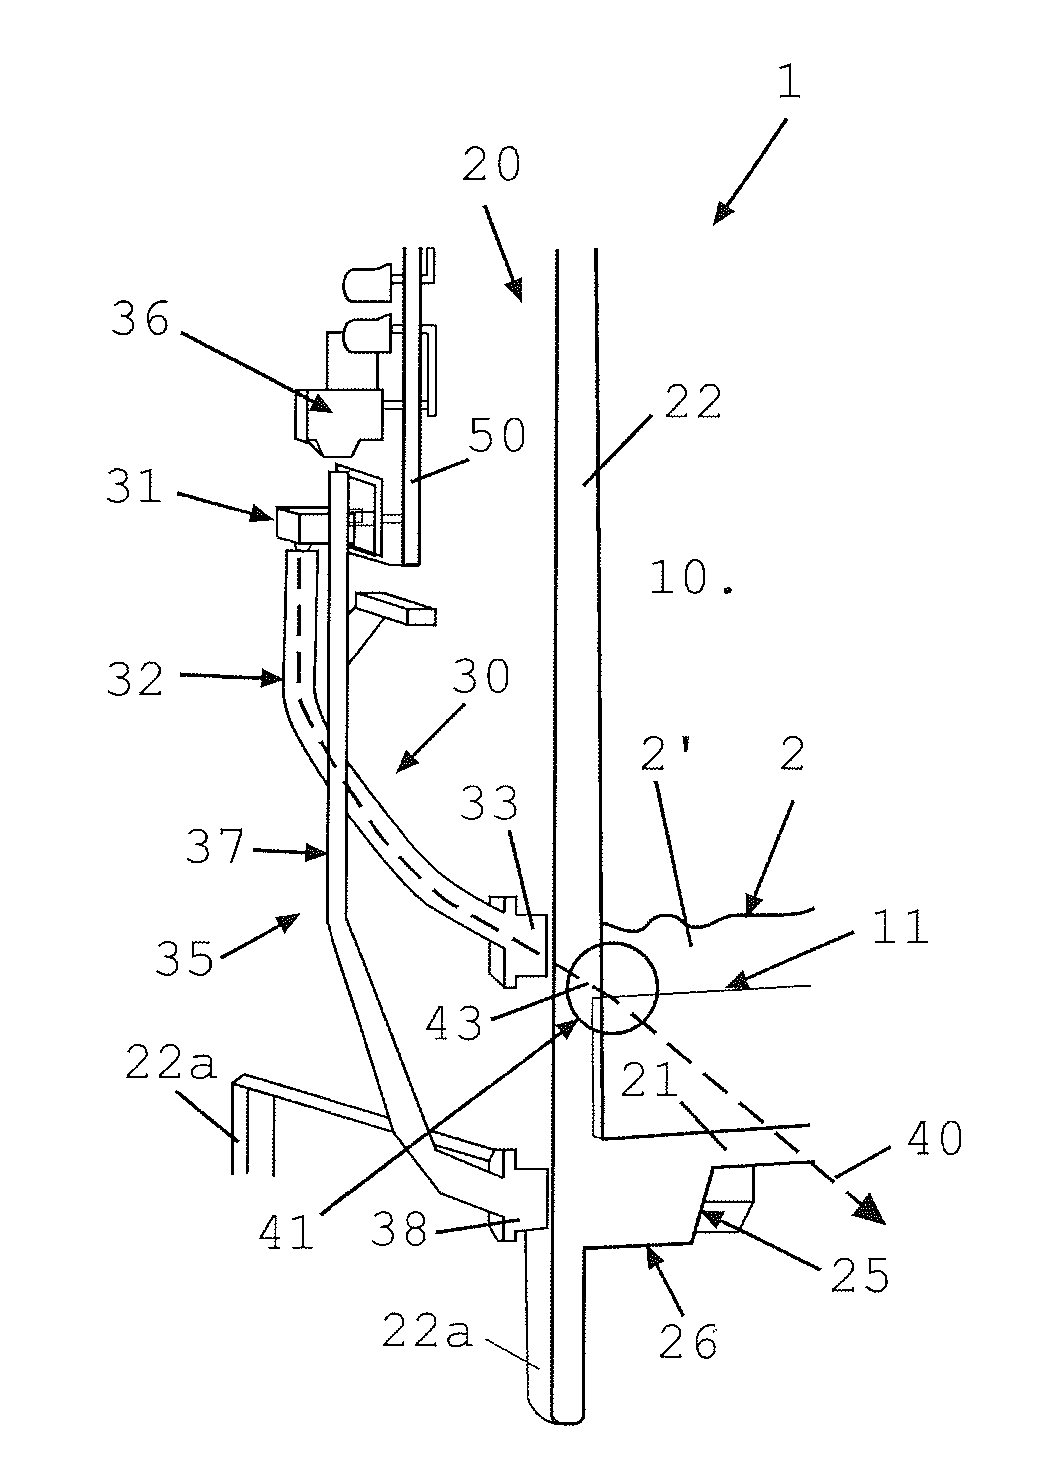 Optical level detector for a beverage machine